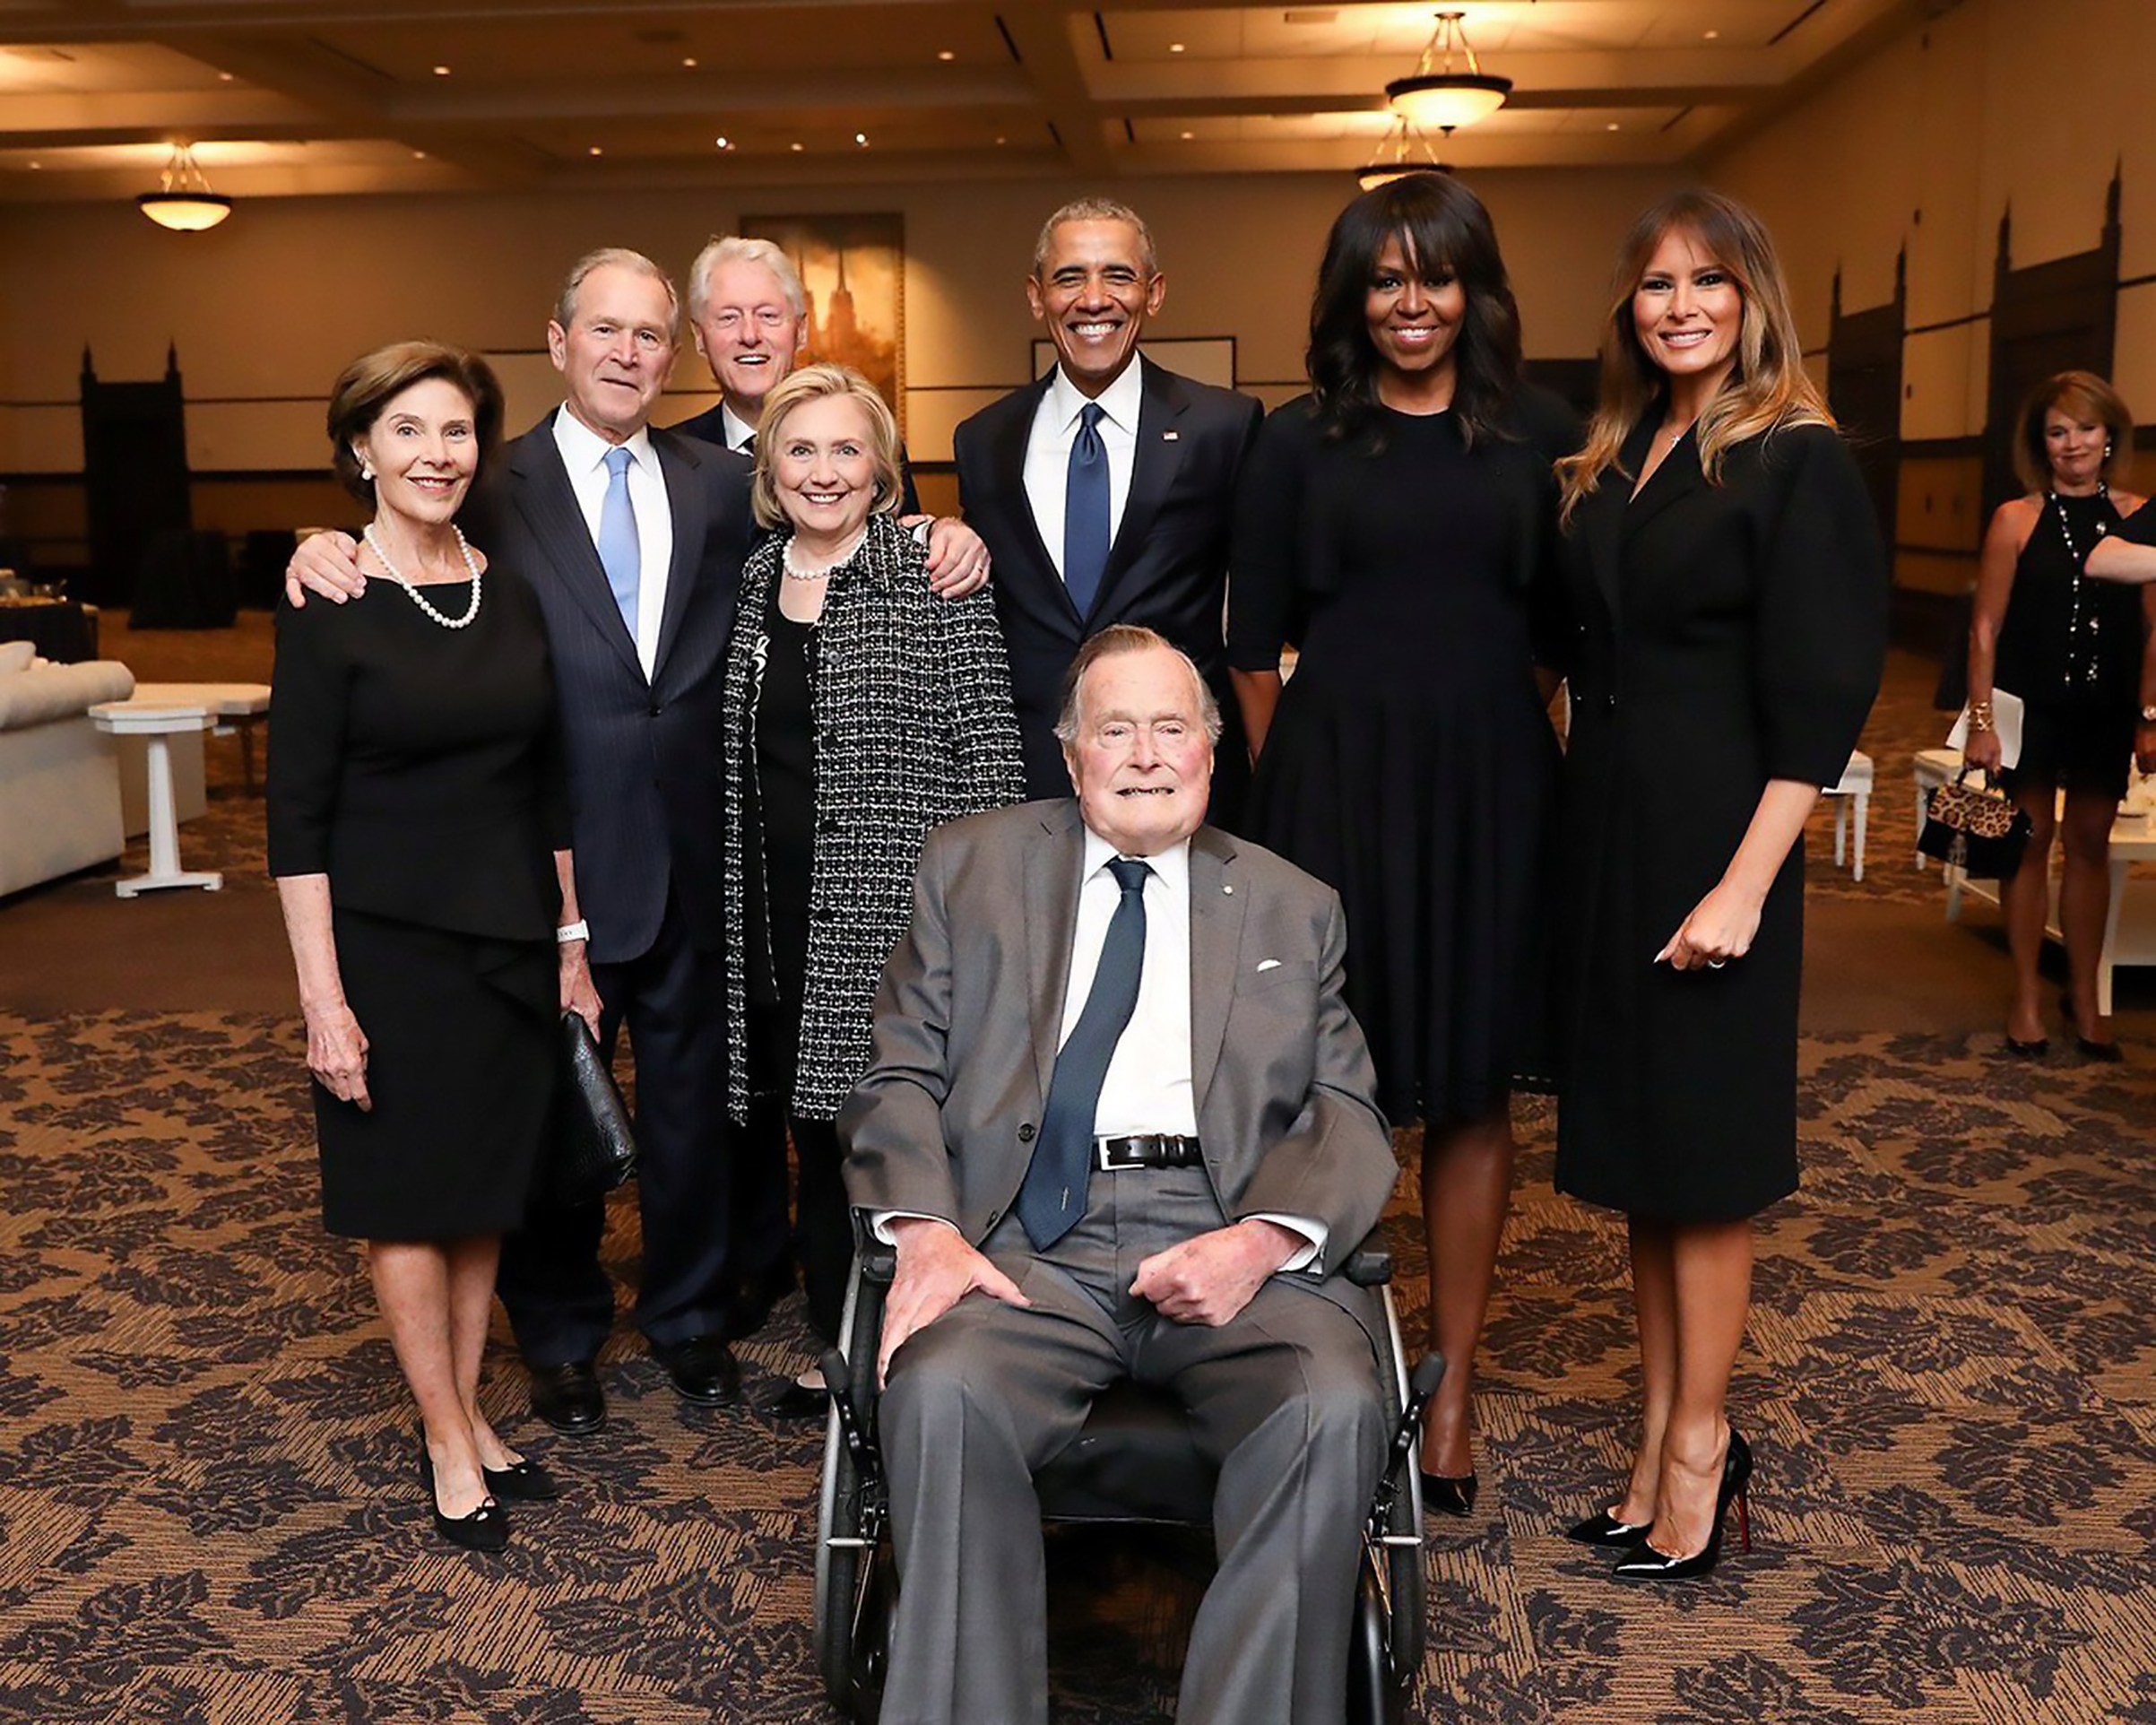 Former U.S. presidents and first ladies pose with former President George H.W. Bush at the funeral of his wife, Barbara Bush, in Houston on April 21, 2018. From left: Laura Bush, George W. Bush, Bill Clinton, Hillary Clinton, Barack Obama, Michelle Obama and Melania Trump. (Paul Morse—Office of George H.W. Bush/Reuters)